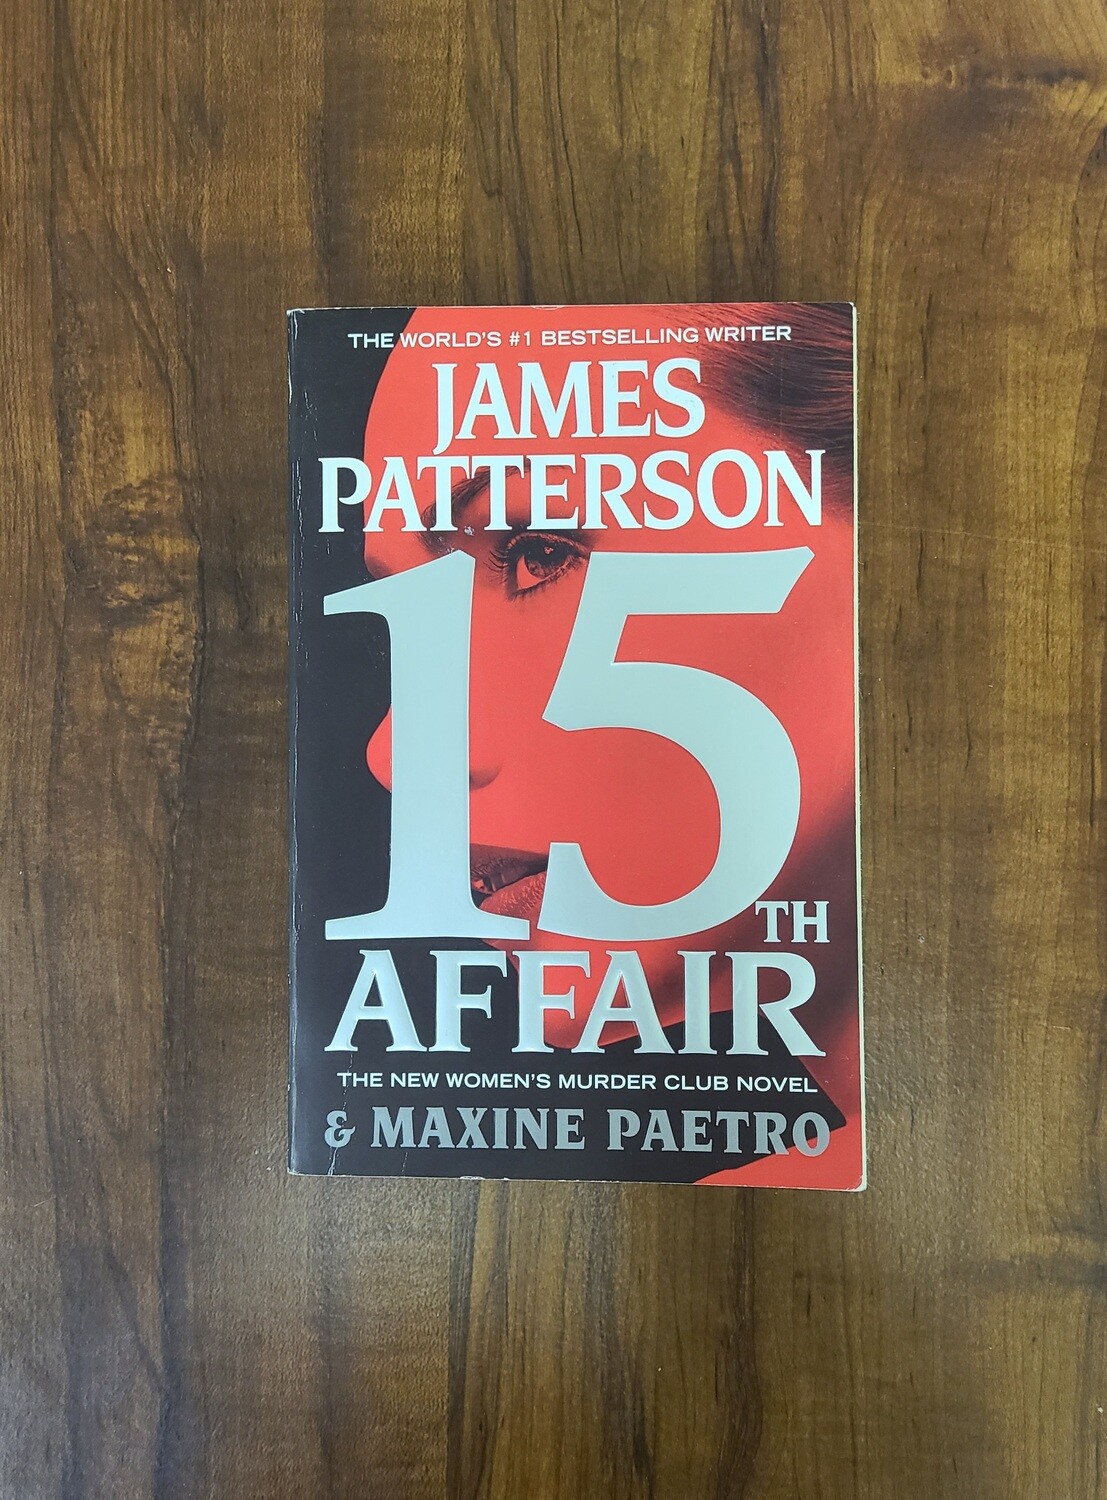 15th Affair by James Patterson - Paperback